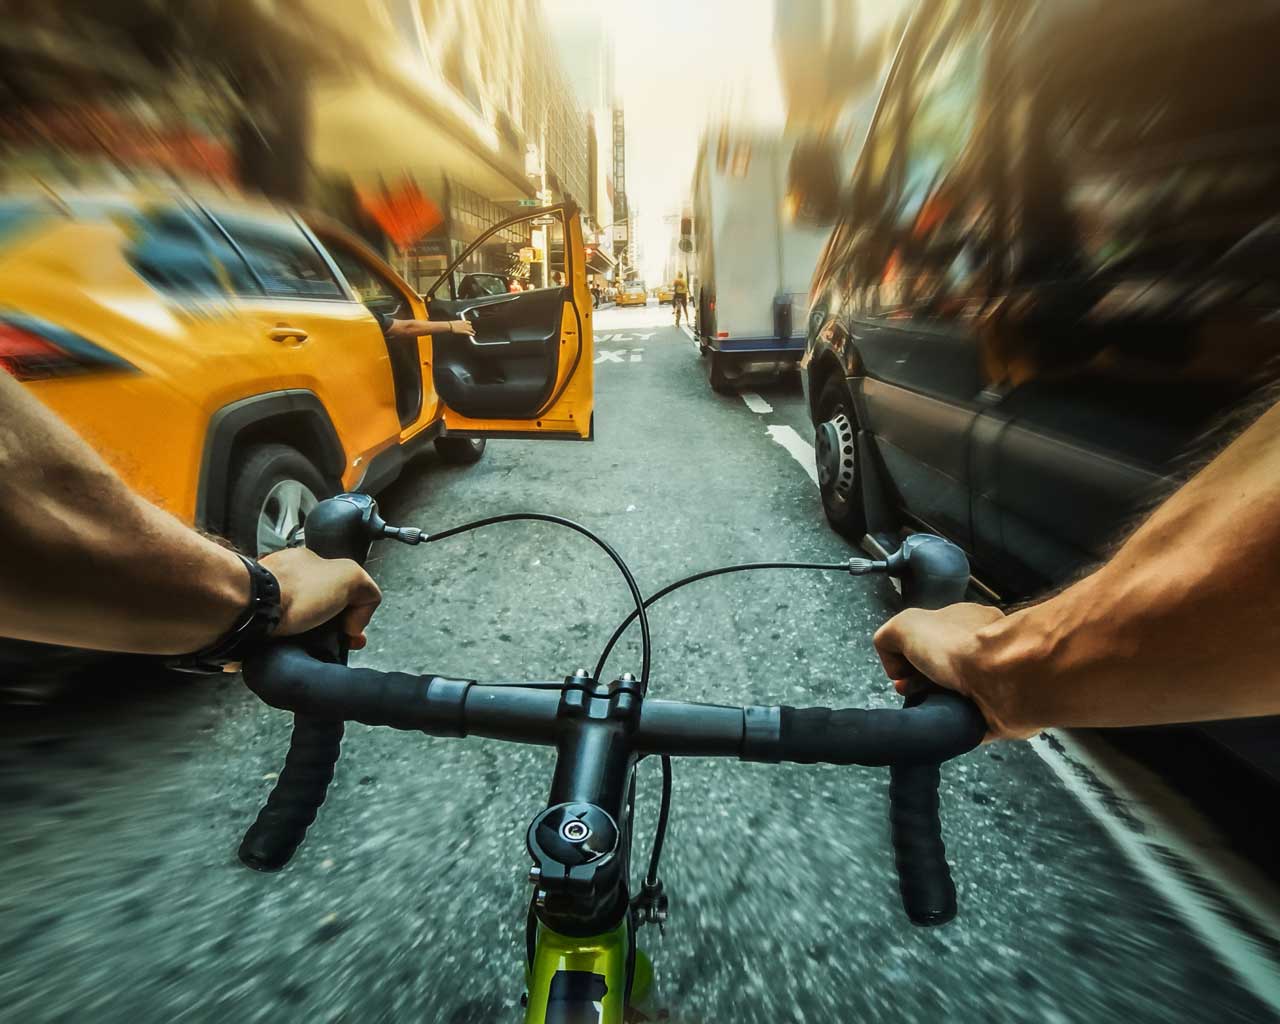 NYC bicycle accident attorney